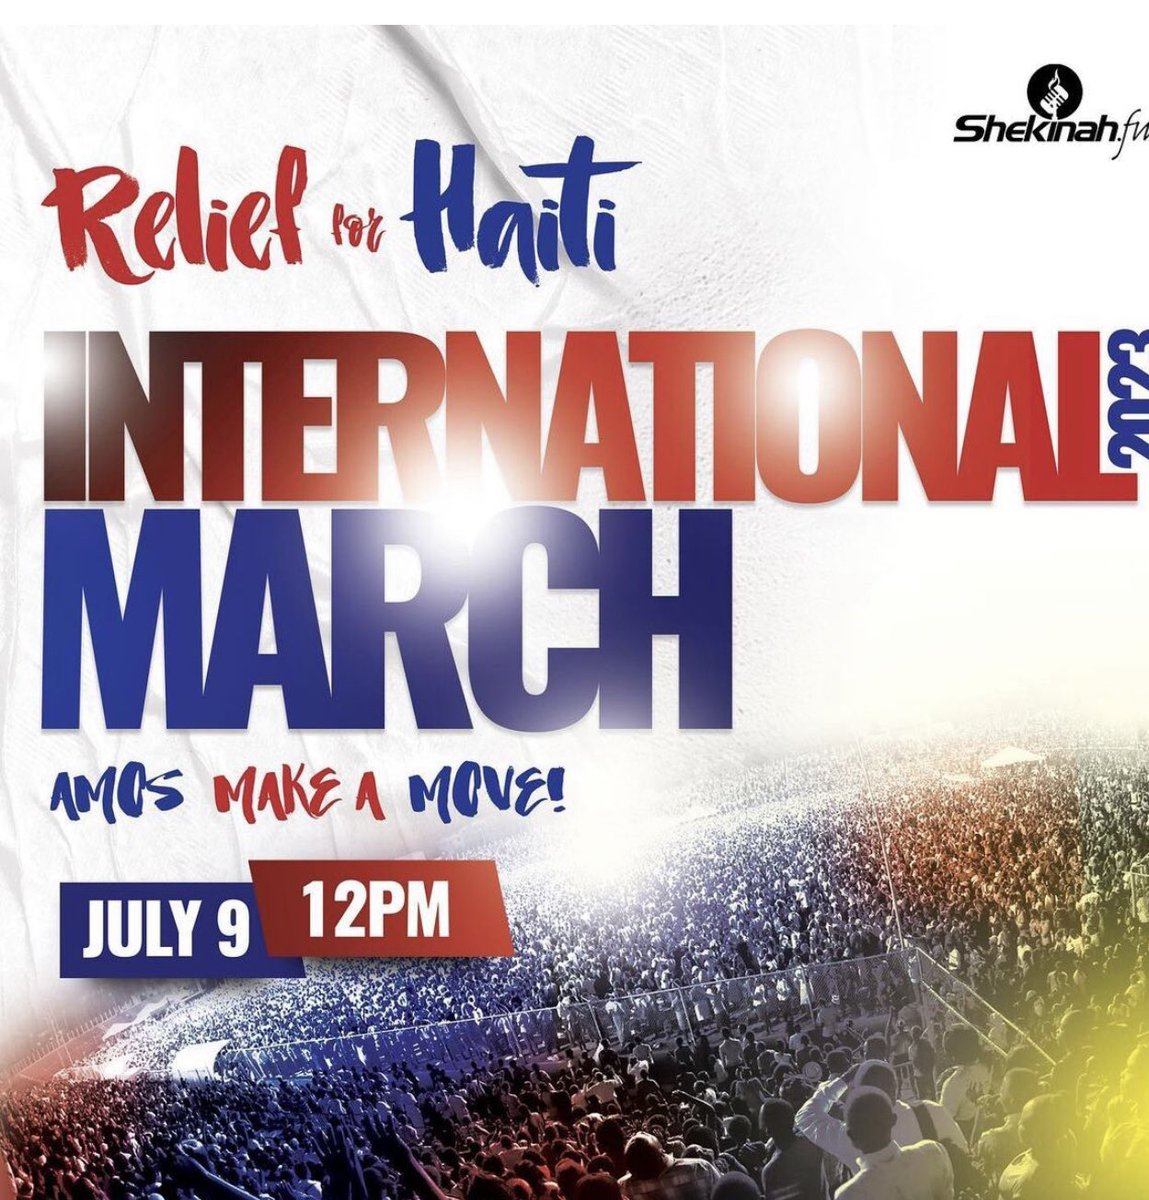 Please come join us to march for Haiti’s relief this Sunday July 9th from 12pm to 3pm to demand Accountability, Peace and stability for the nation. Meet up: 297 Elmwood Ave Providence. I hope to see you there.#SoufpouAyiti